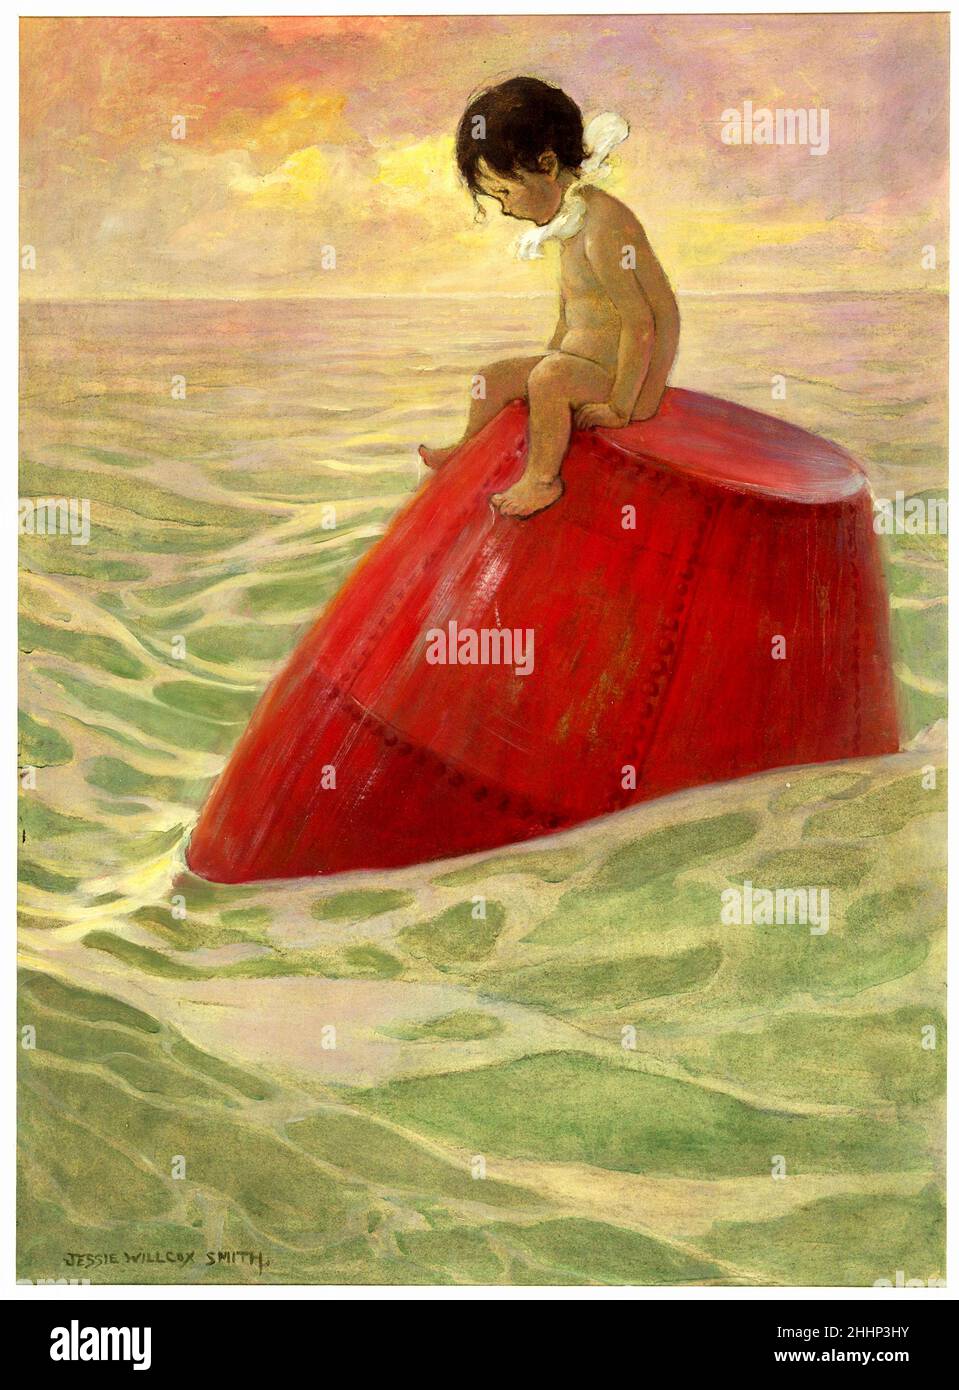 Jessie Willcox Smith illustrations for the children's book The Water Babies by Charles Kingsley - Tom sat on the buoy for long days - 1916 Stock Photo